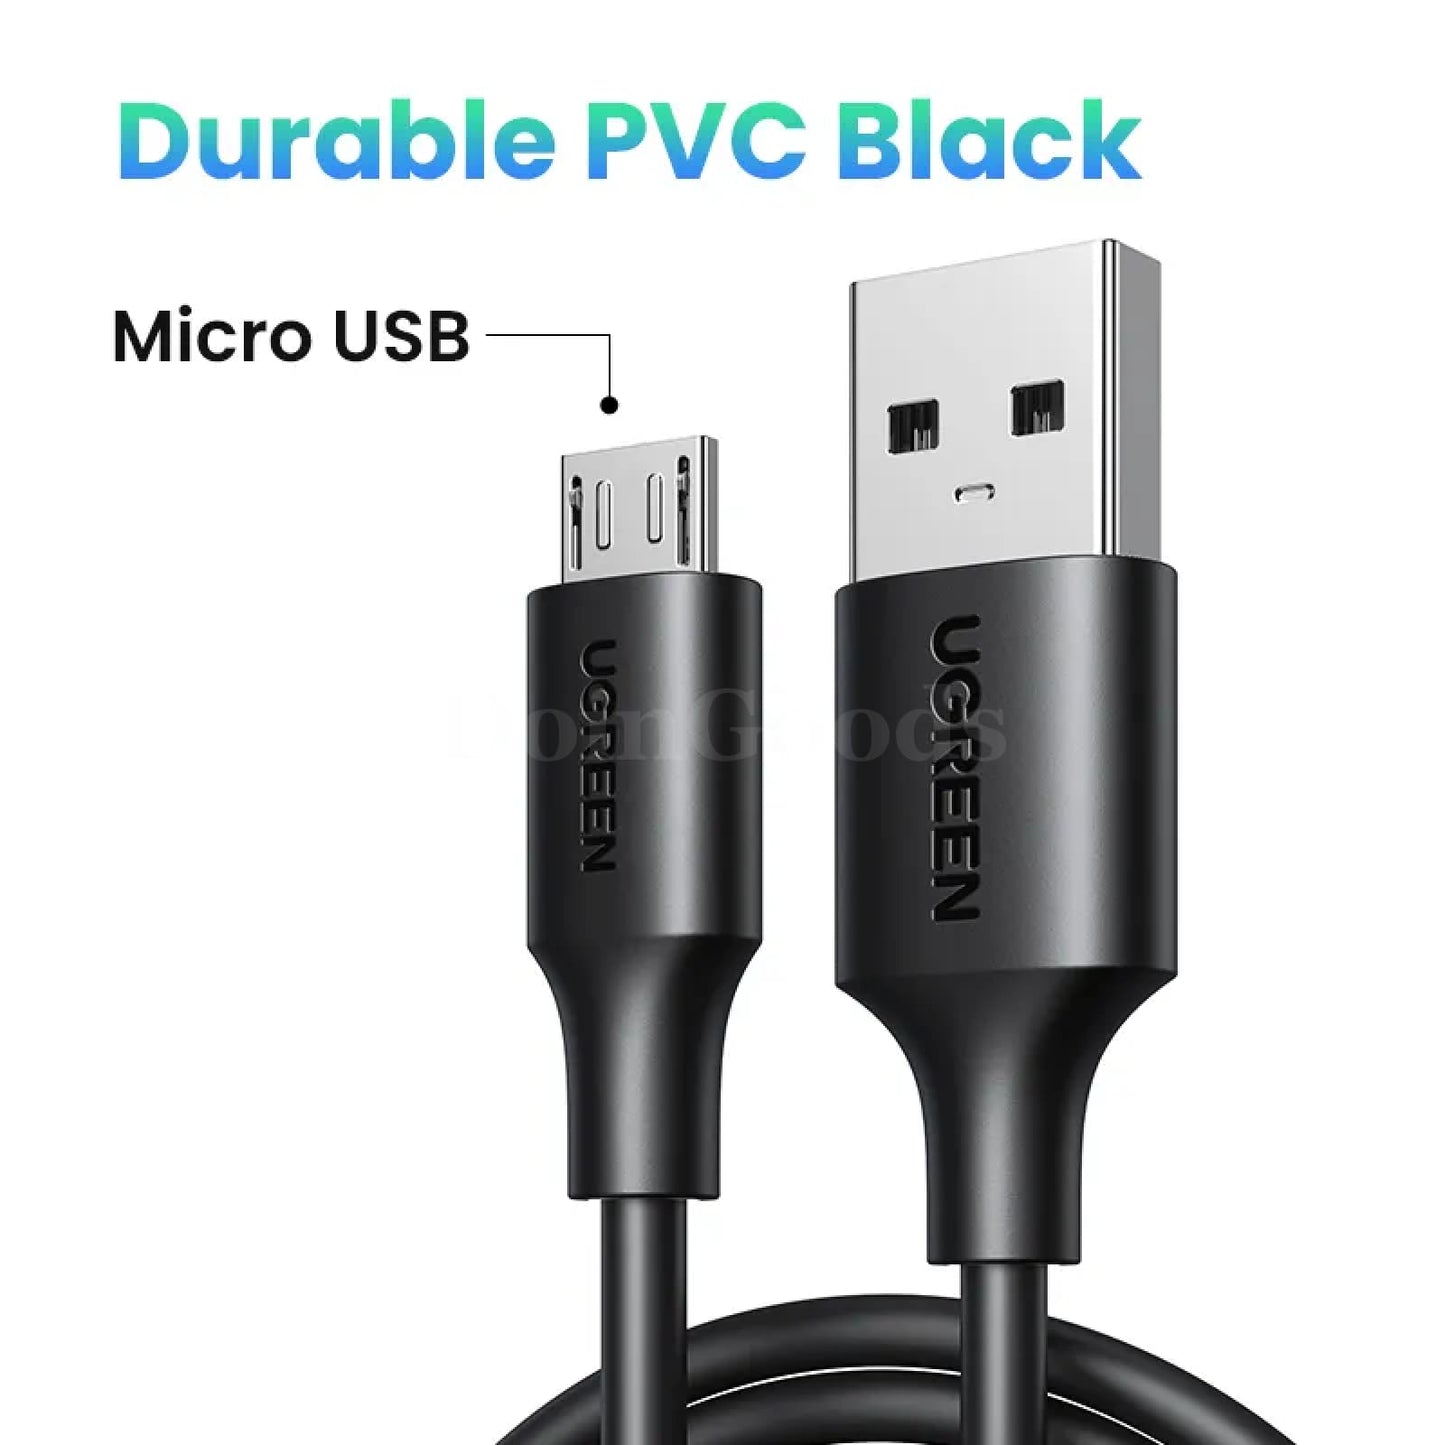 Ugreen Micro Usb Cable Charger For Samsung Galaxy S7 S6 - Fast Charging Mobile Phone Cord Pvc Black